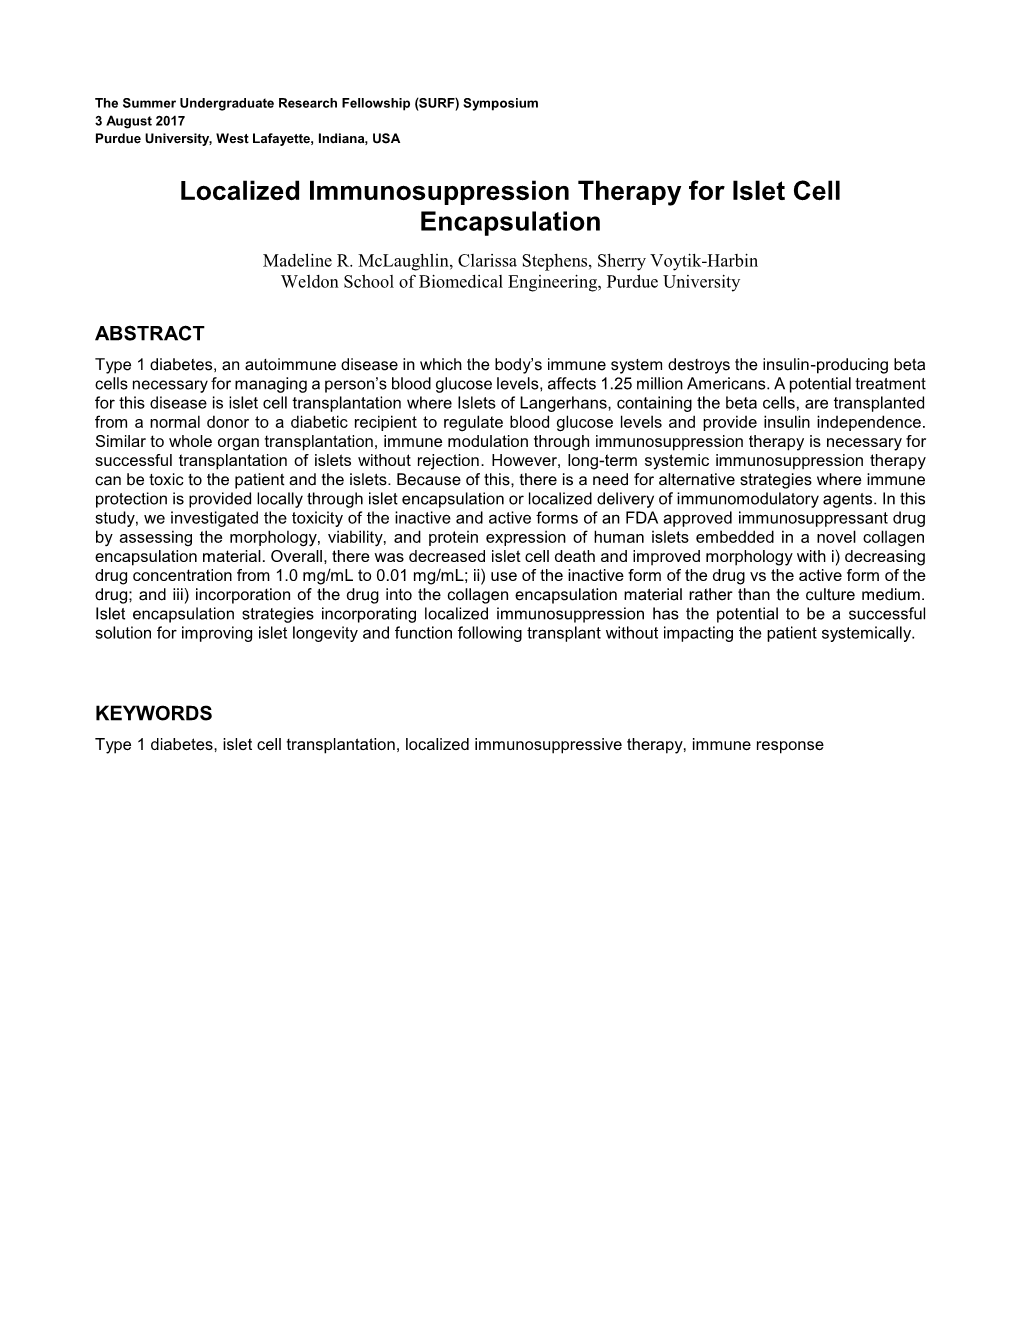 Localized Immunosuppression Therapy for Islet Cell Encapsulation Madeline R